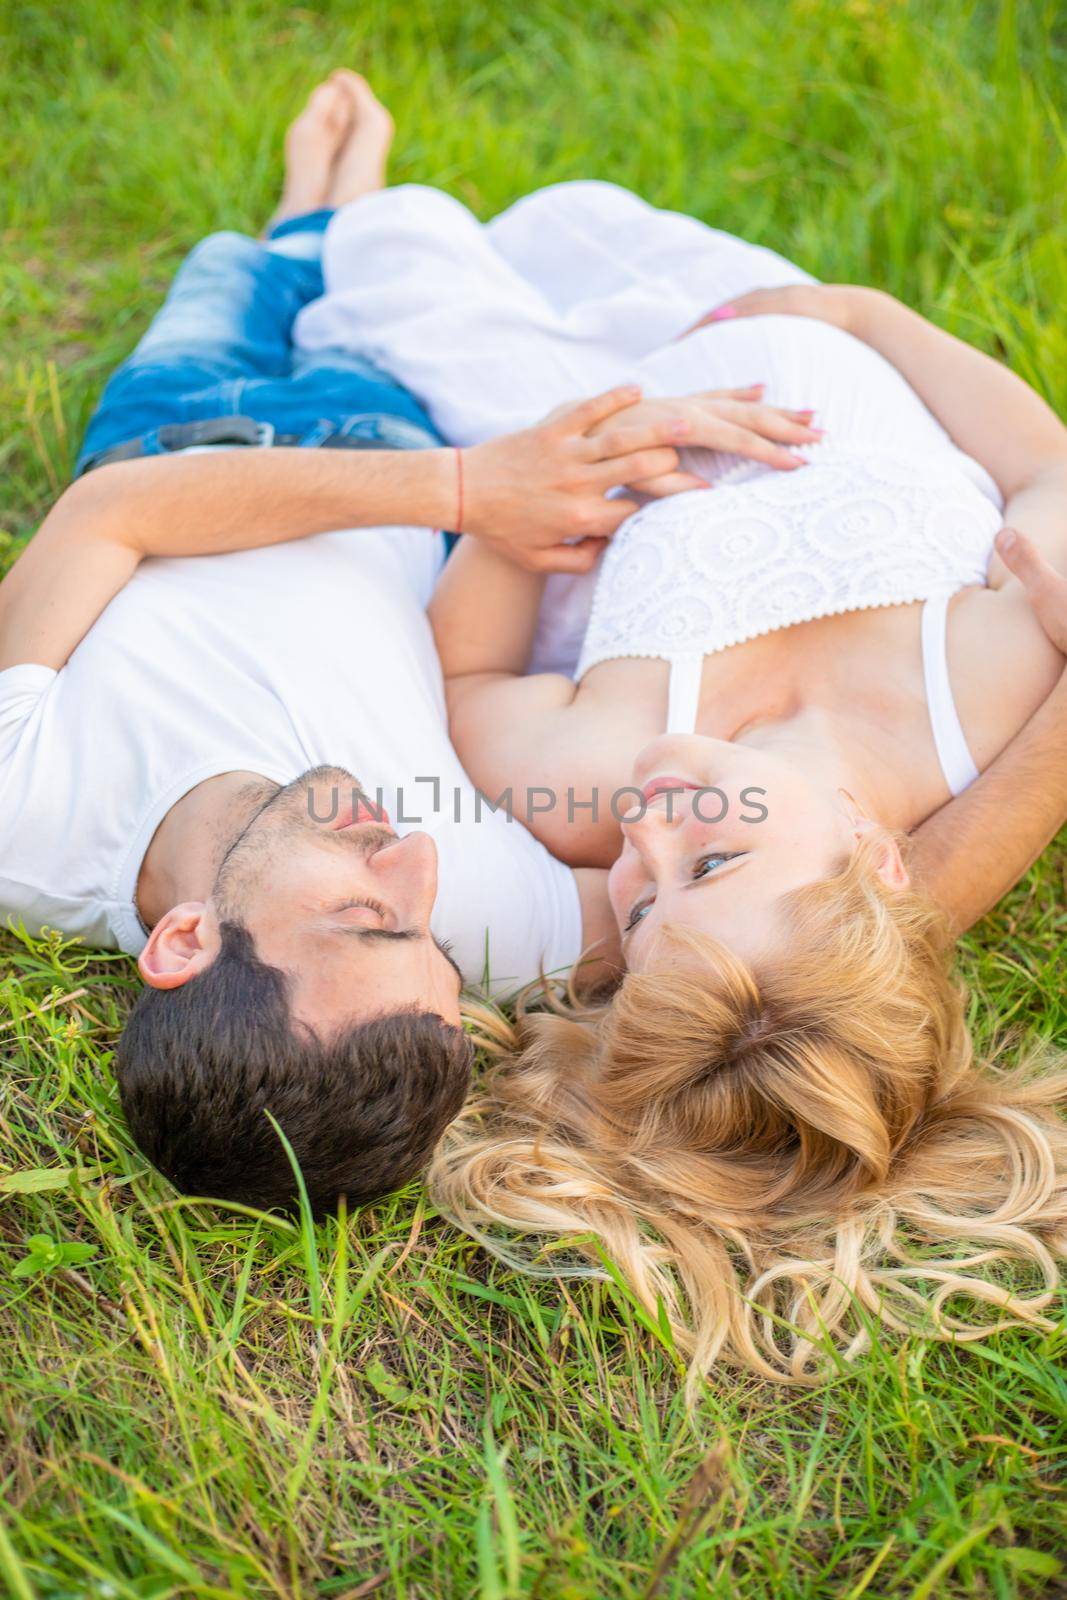 Pregnant woman and man photo shoot lie on the grass. Selective focus.